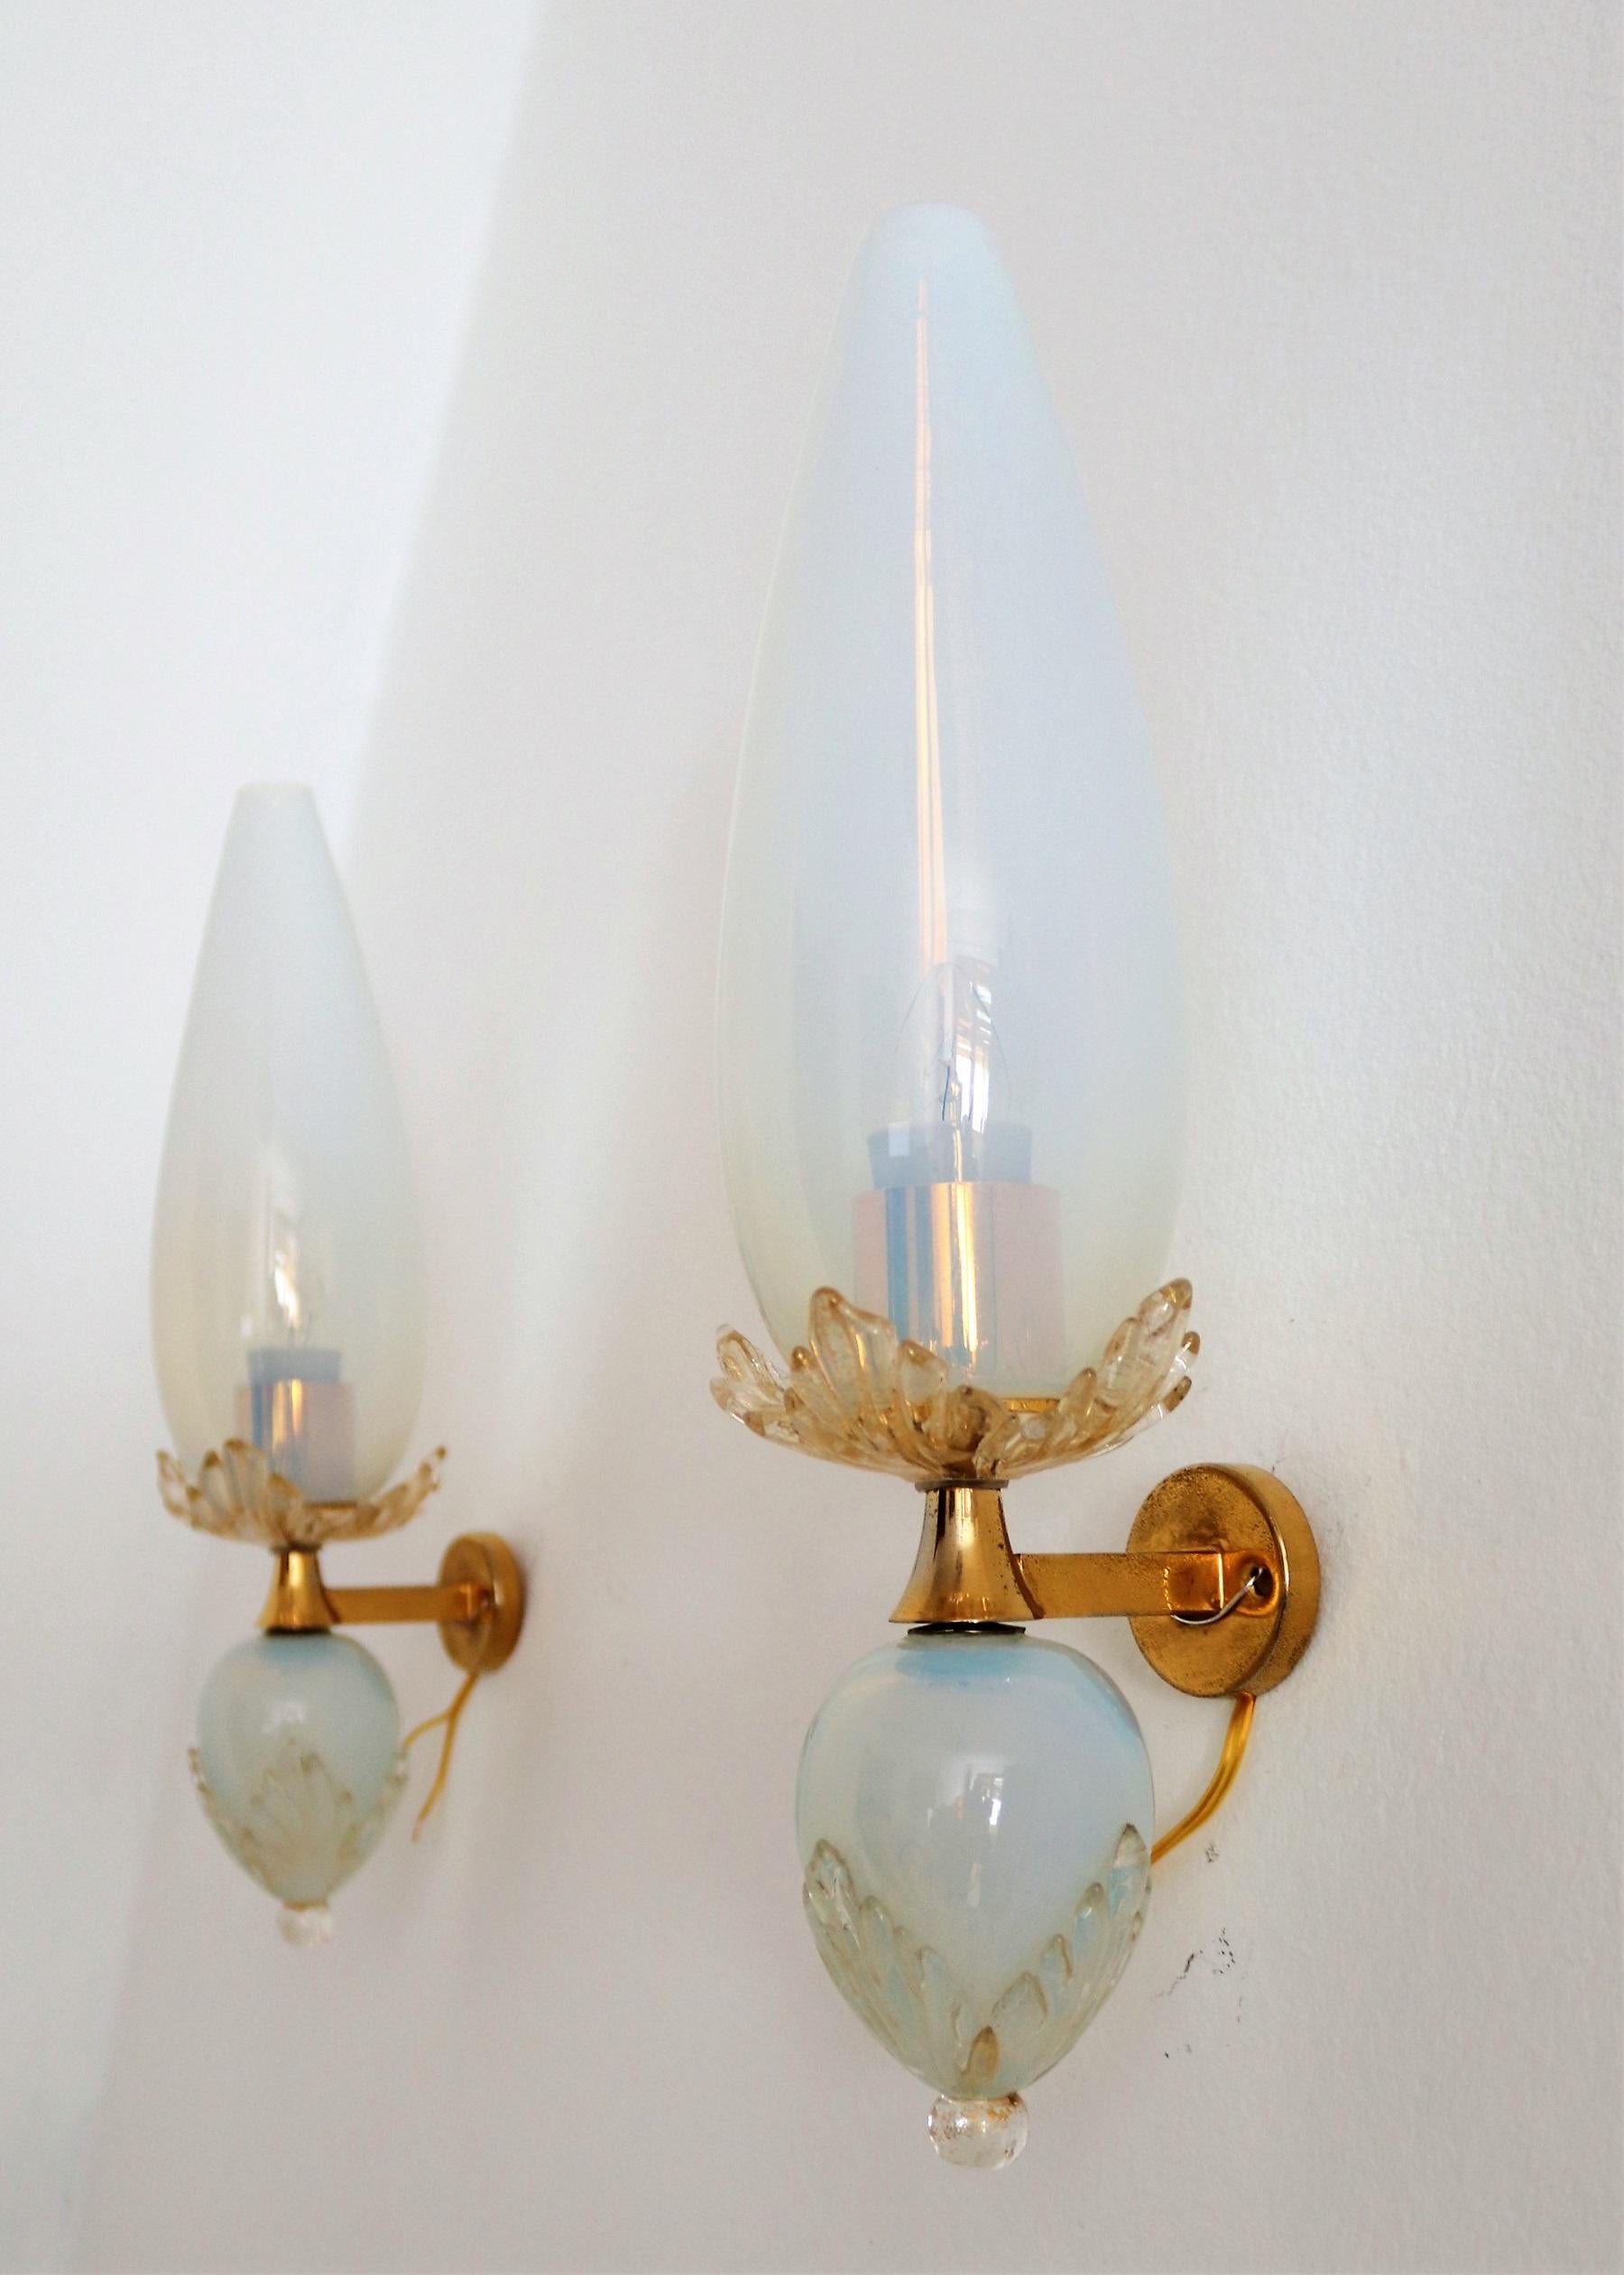 Italian Midcentury Handcrafted Opaline Murano Glass Wall Sconces by Venini 1970s 1